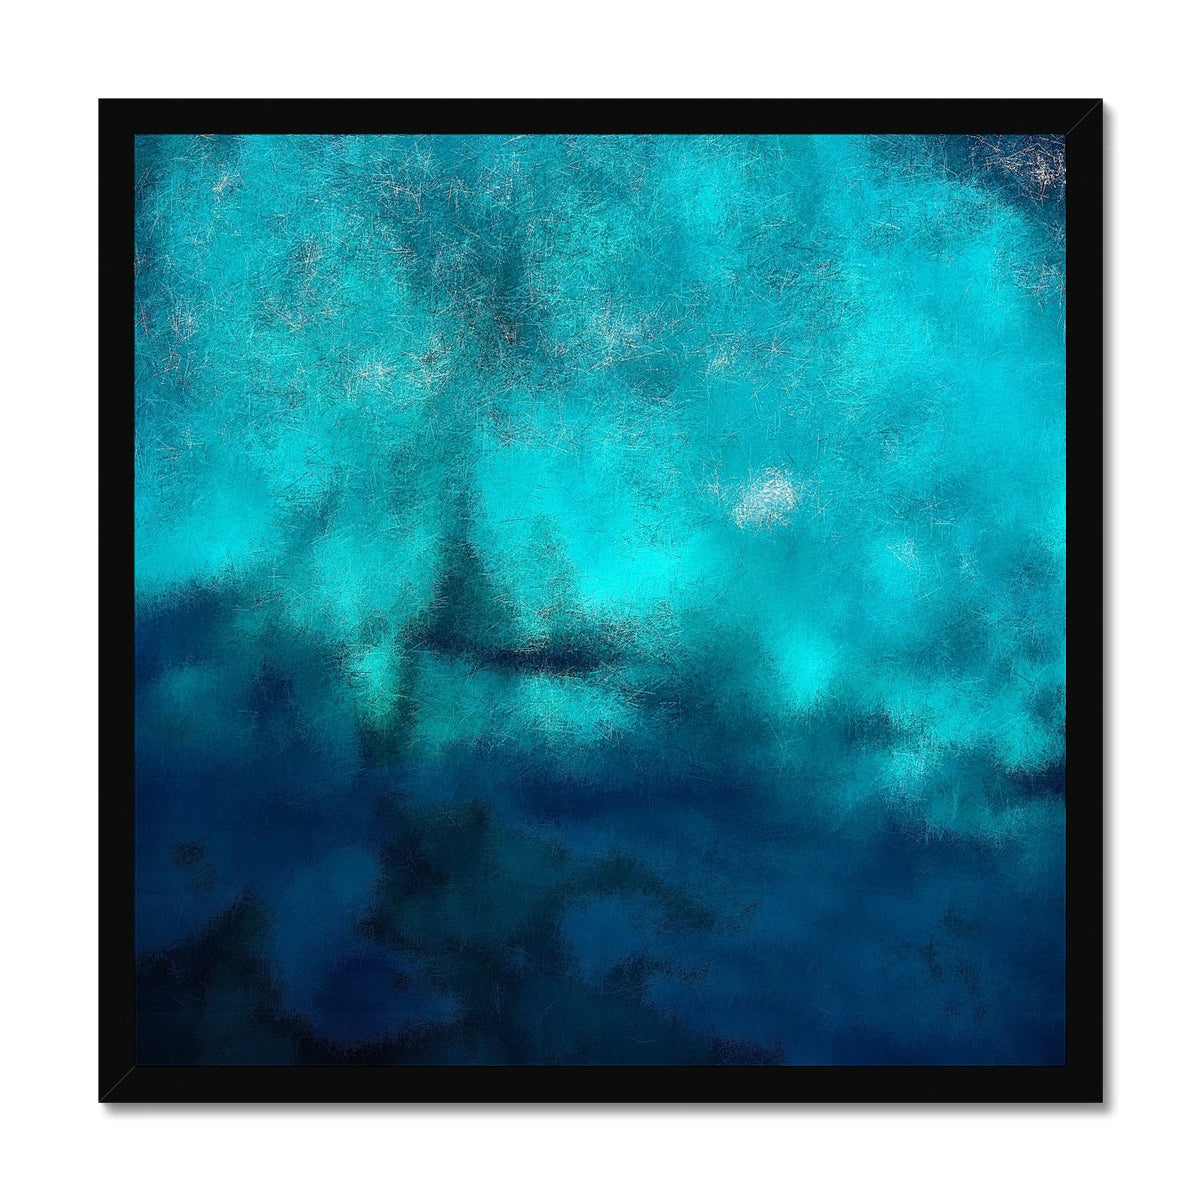 Diving Off Kos Greece Painting | Framed Prints From Scotland-Framed Prints-World Art Gallery-20"x20"-Black Frame-Paintings, Prints, Homeware, Art Gifts From Scotland By Scottish Artist Kevin Hunter